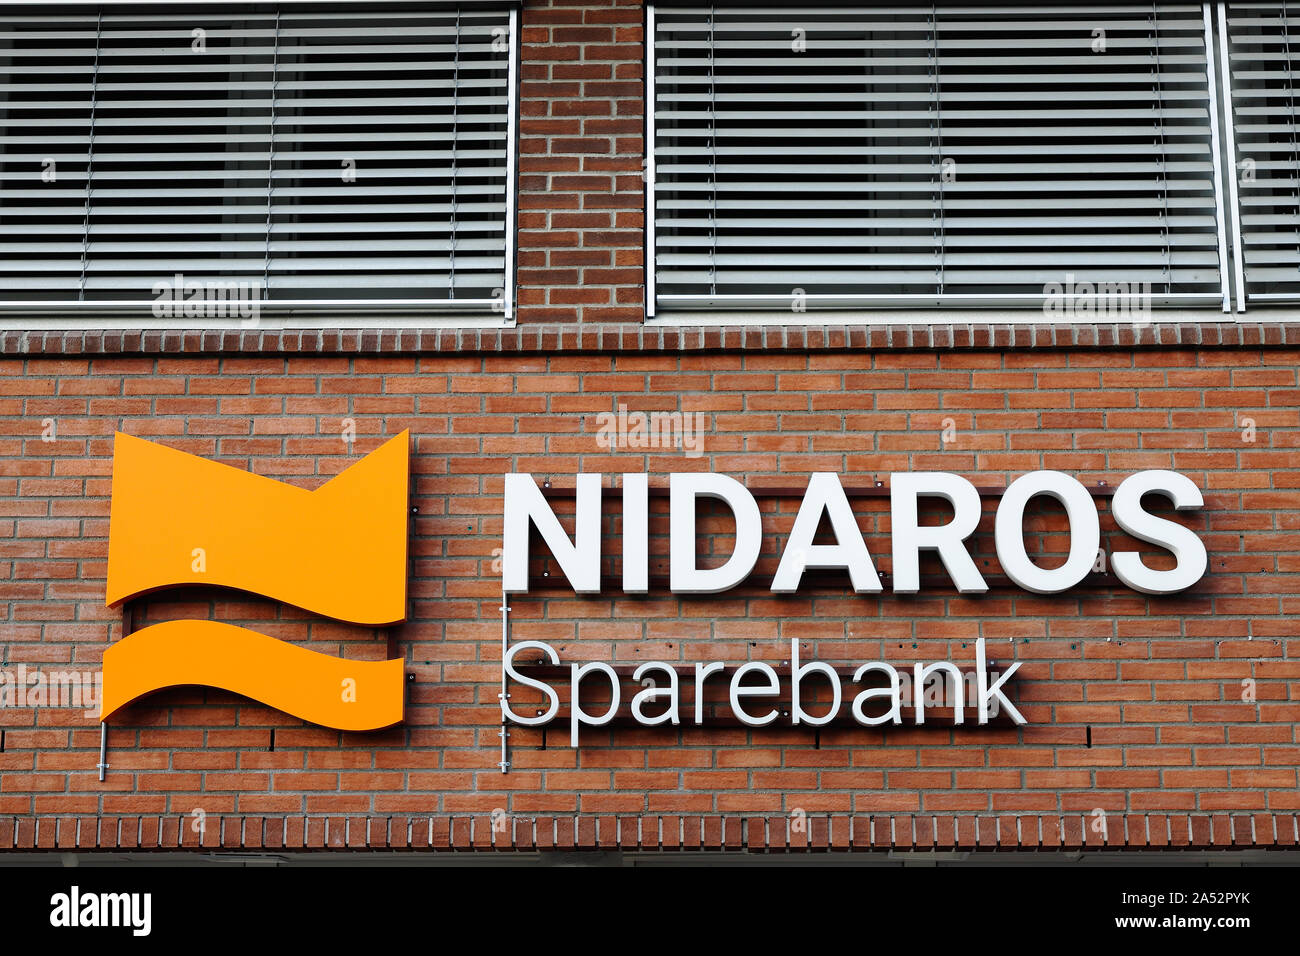 Klabu, Norway - October 13, 2019: The logo and sign for the Nidaros Sparebank outside its bank office. Stock Photo